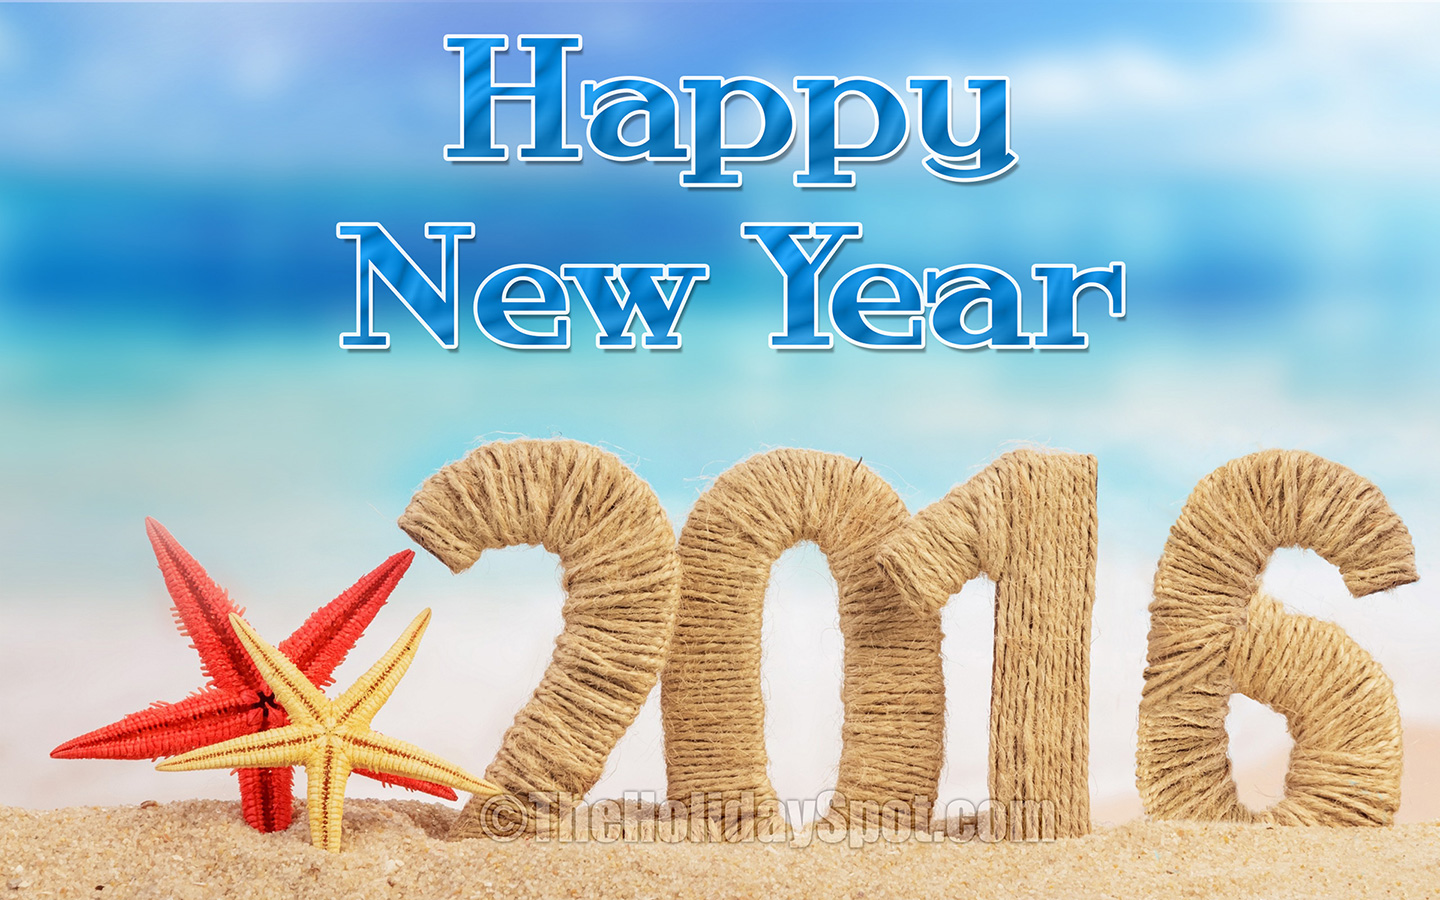 Happy New Year 2016 Written With Rope